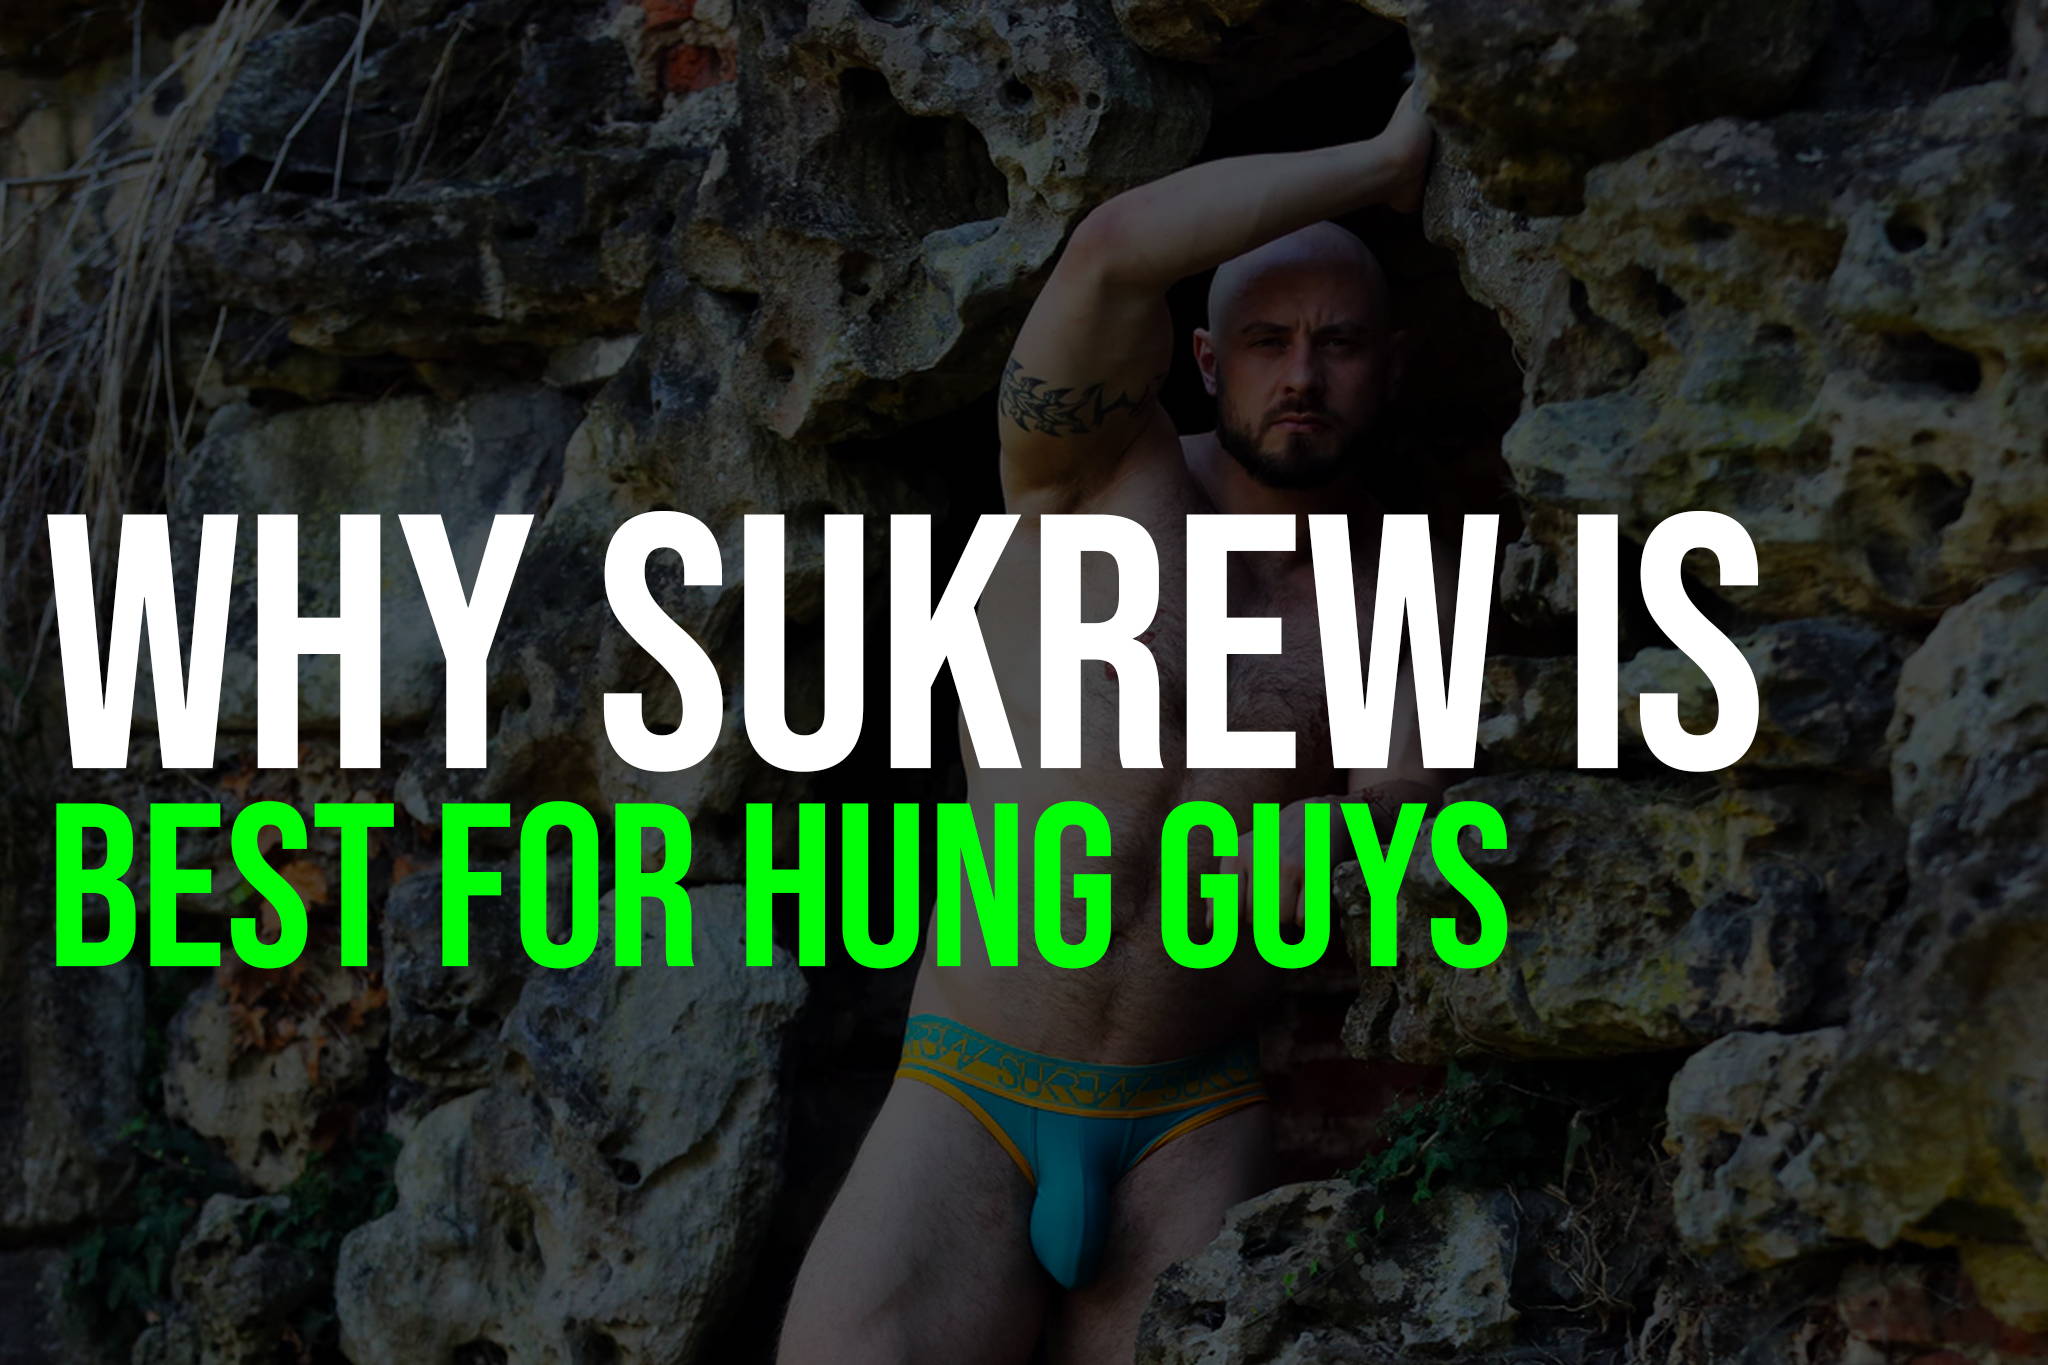 why sukrew is best for hung guys